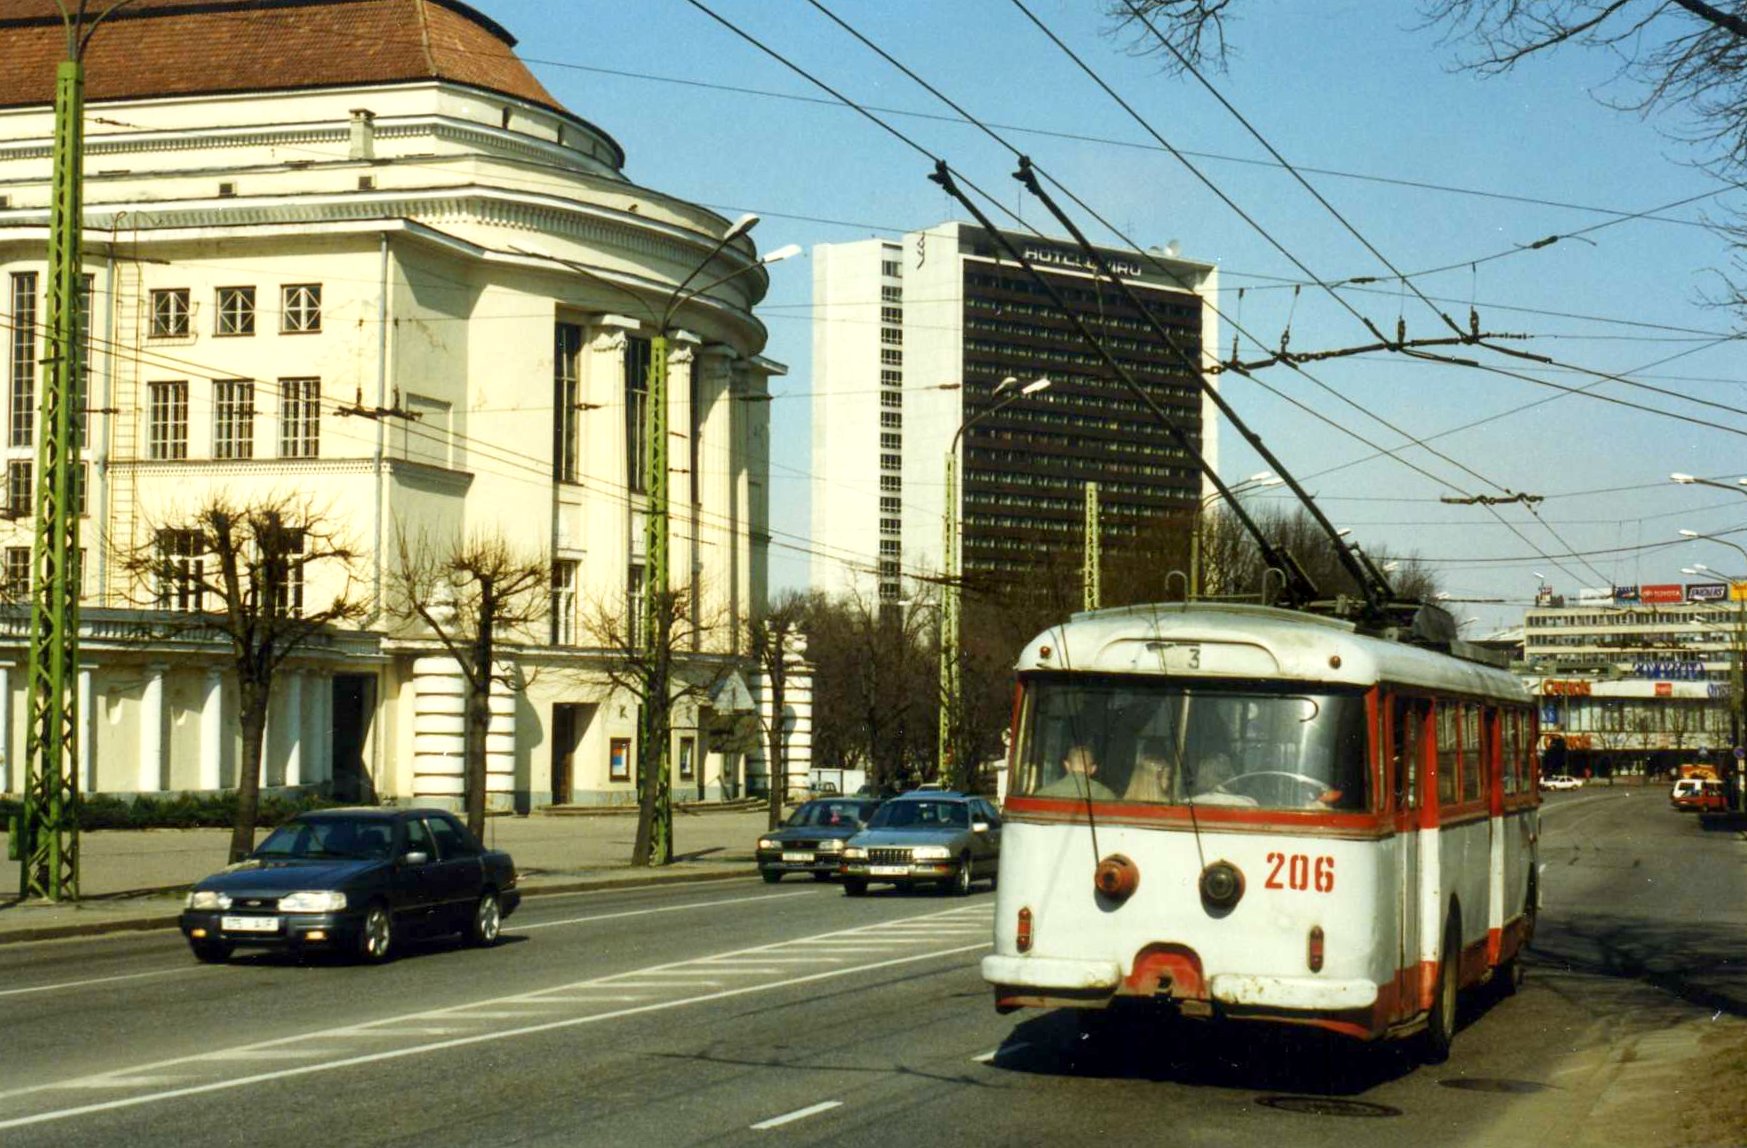 Tallinn,Estonia. TTTK Škoda 9Tr Trolleybus nr. 206. May 1996 - Skoda 9Tr No. 206. When it was deployed in Tallinn in 1983, it was new to TTTK (Tallinna Trammi-ja Trollibussikoondis), but one of the last of the 9Tr models deployed in the city. No. 206 was finally withdrawn from service in 1999.[1] By the year 2000, all the remaining 9Tr trolleys were decommissioned. In 1996, only about ten were in operation, including the venerable 92-numbered two-door model.


Route No. 3 connects Mustamäe and Kaubamaja.
In the background:


the "Estonia" theatre and concert building;
Hotel Viru. In 1996, the lower floors of the building housed

the "Stockmann" department store (sign at the top of the high-rise);
and the Carrols fast food restaurant.



The Carrols brand did not last very long. Either the Carrols restaurant left, or was converted into a Finnish-owned Hesburger restaurant. (For a while, Hesburger operated Carrols-branded fast food restaurants in Finland, but eventually converted nearly all of them to Hesburgers.)
Further back stands the "Teenindusmaja" building (eng.lit. Service House), which throughout 2002/2003 was reconstructed and converted into a hotel.